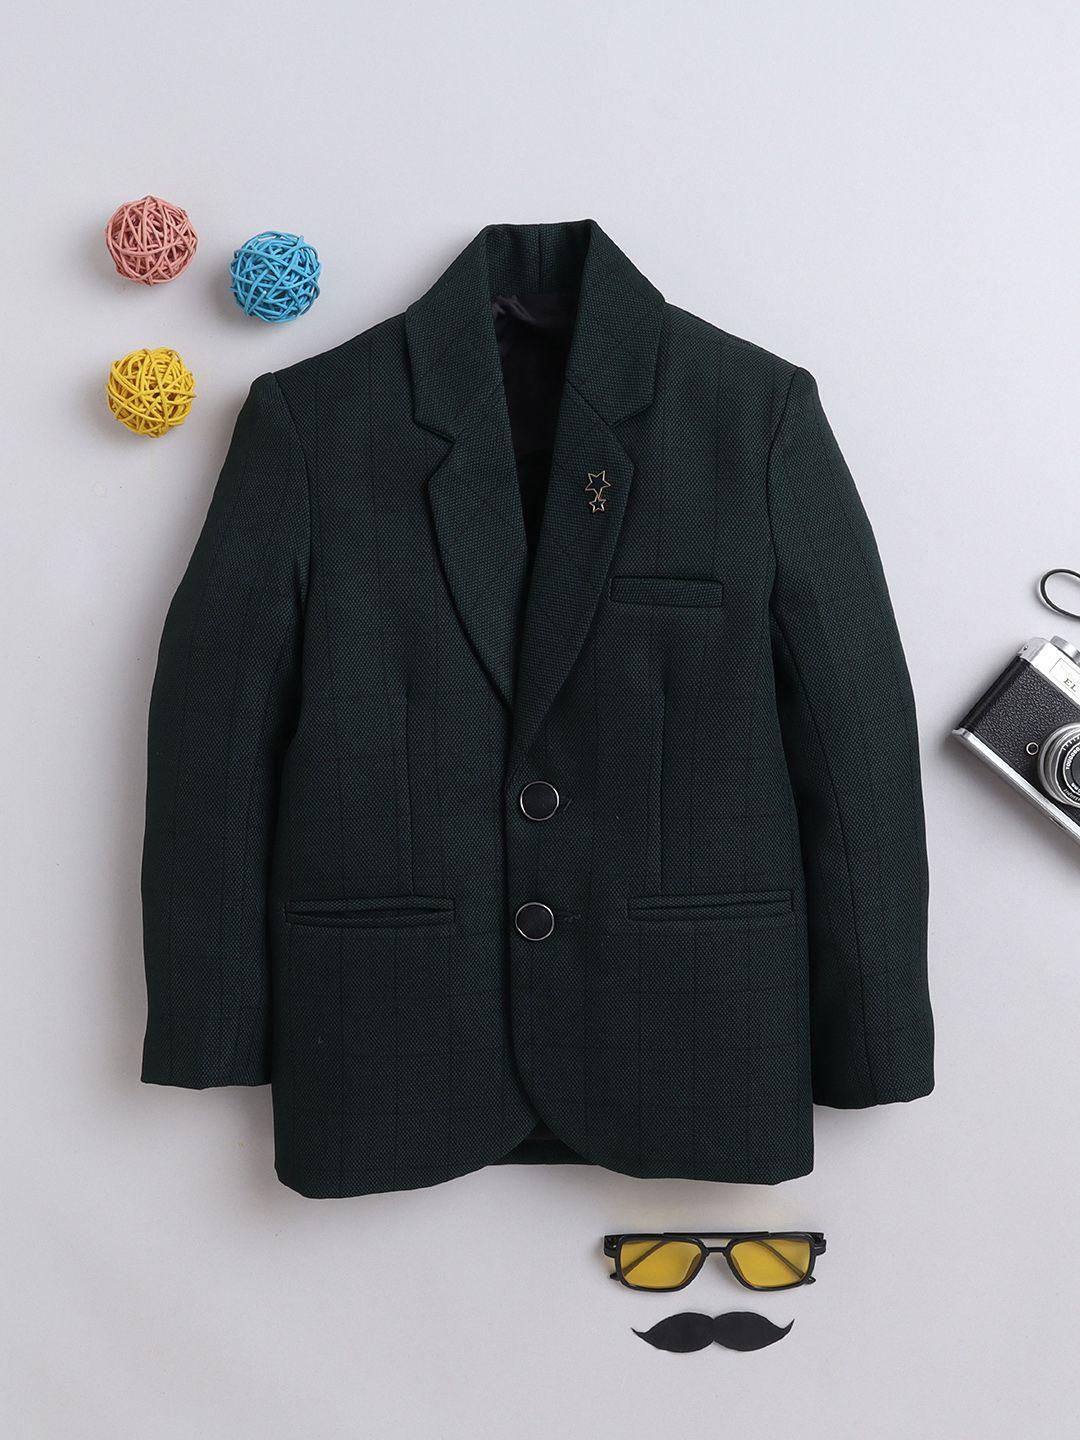 BAESD Boys Checked Notched Lapel Collar Single Breasted Blazer